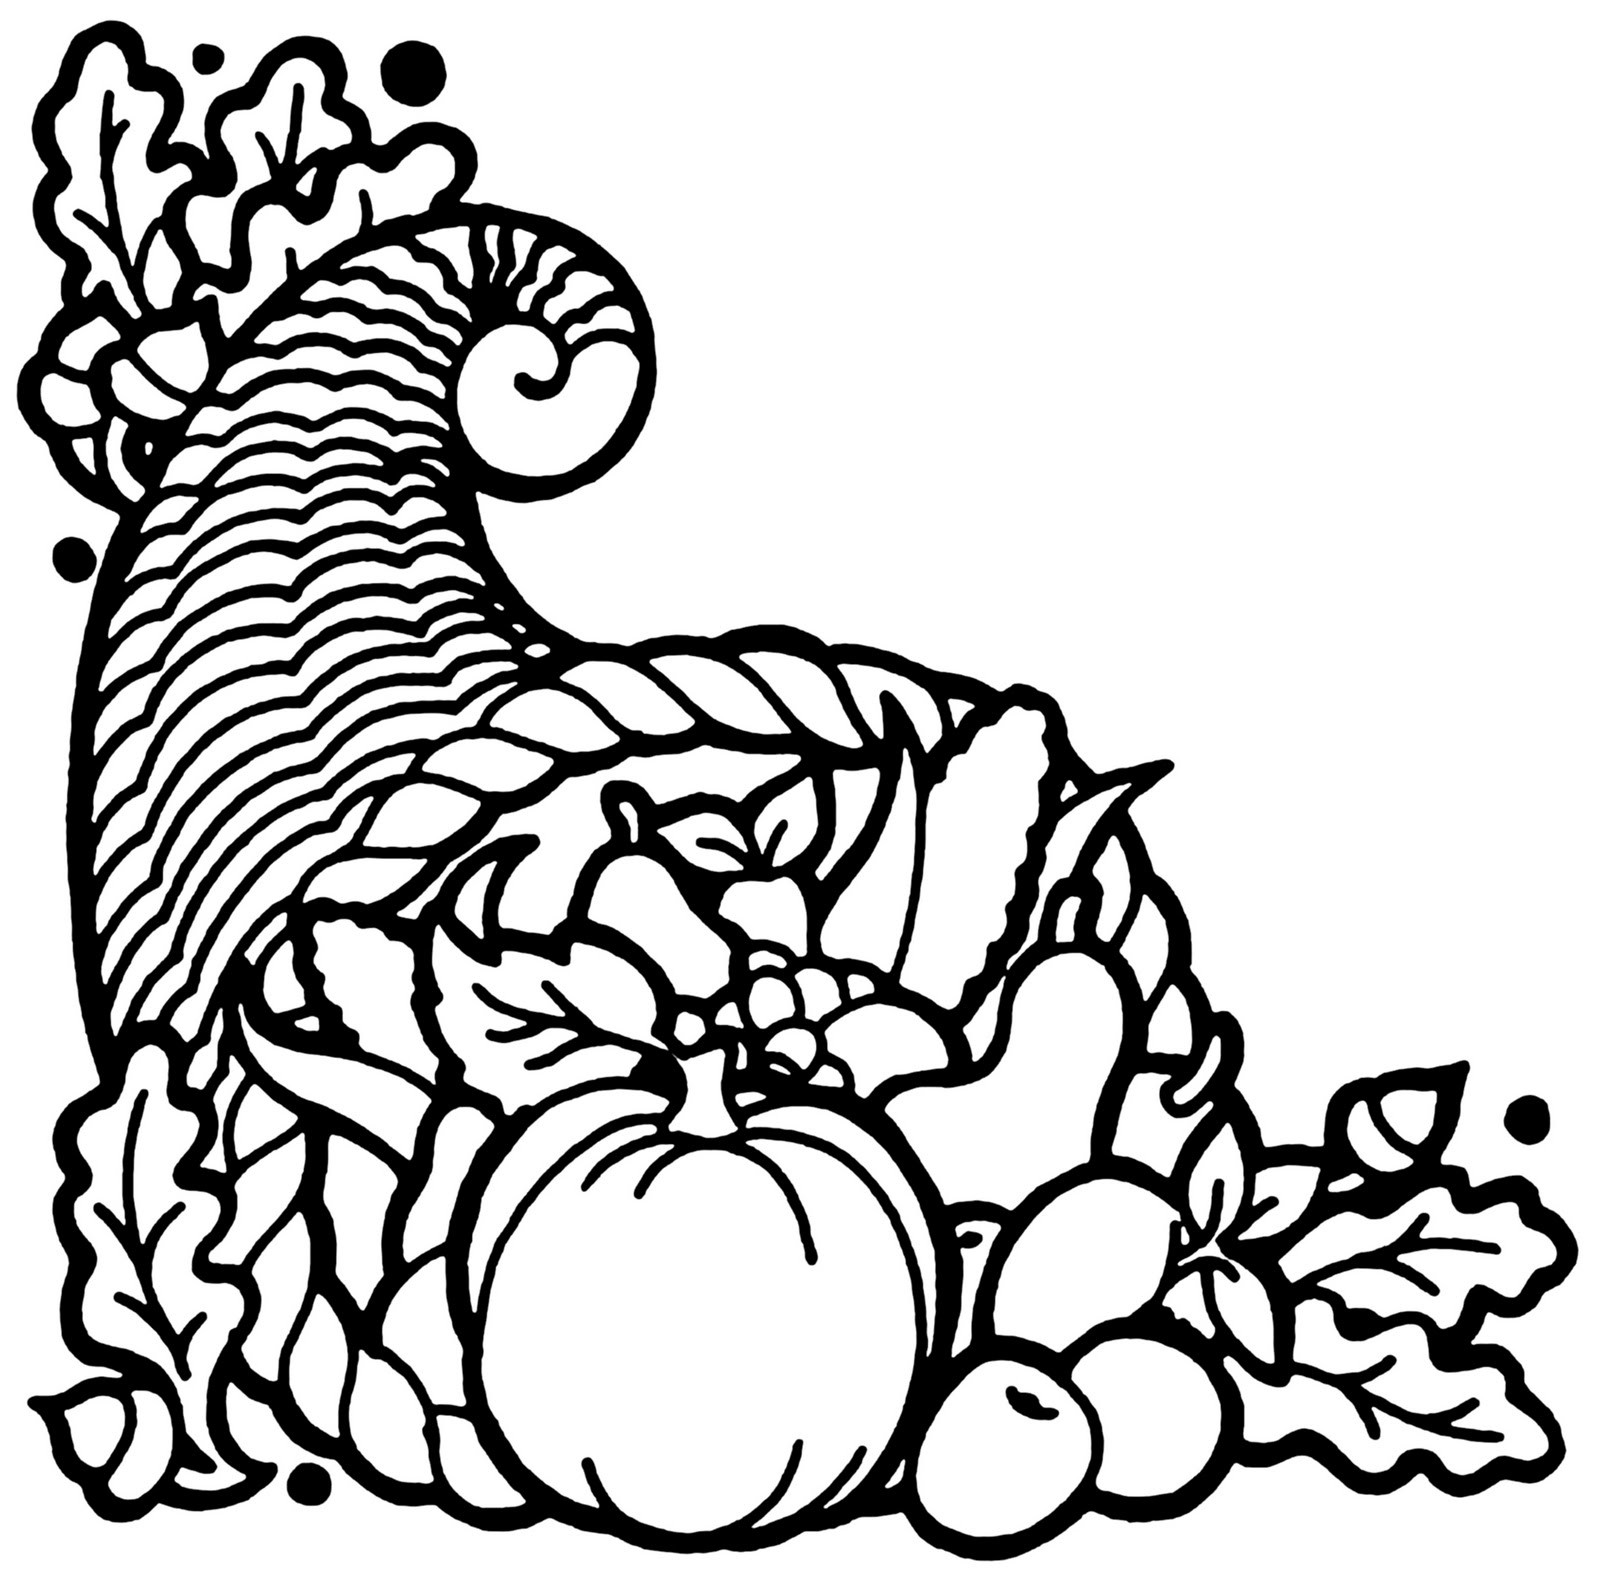 Thanksgiving Turkey Clipart Black And White
 Turkey Eve Meal on Metcalf The Thanksgiving Cornucopia